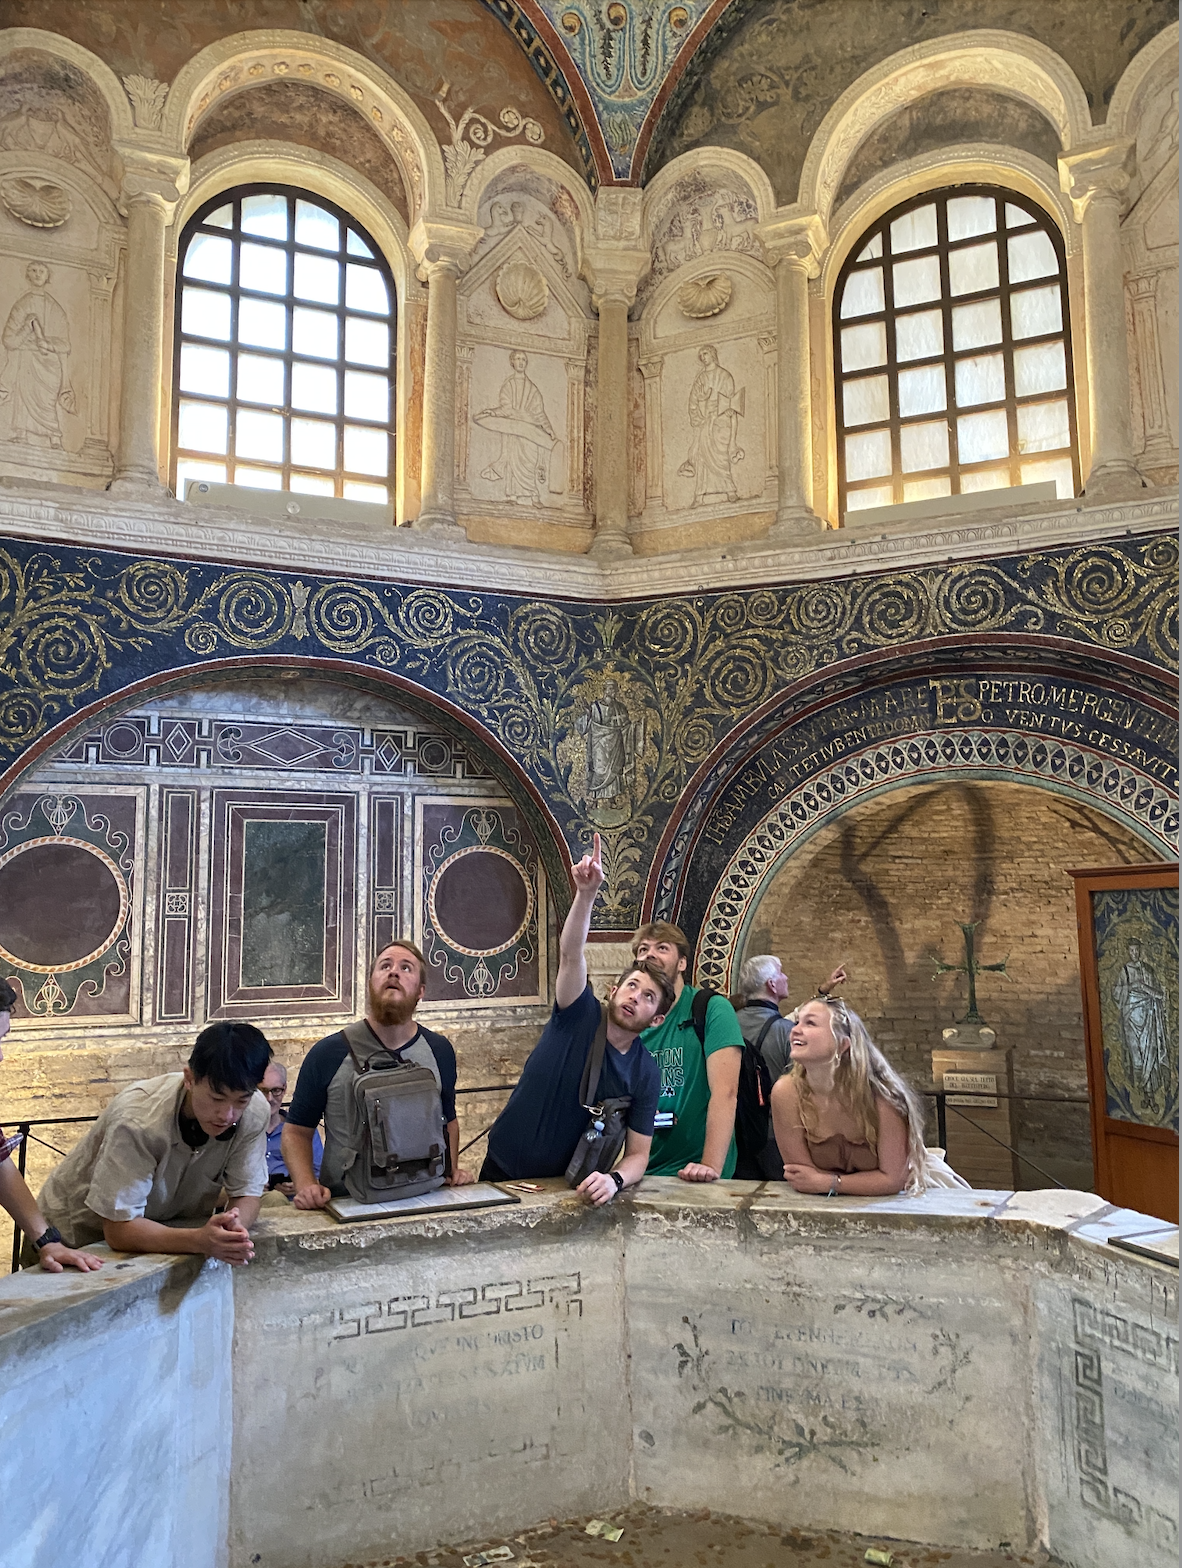 group of students in a historic building examining architectural features